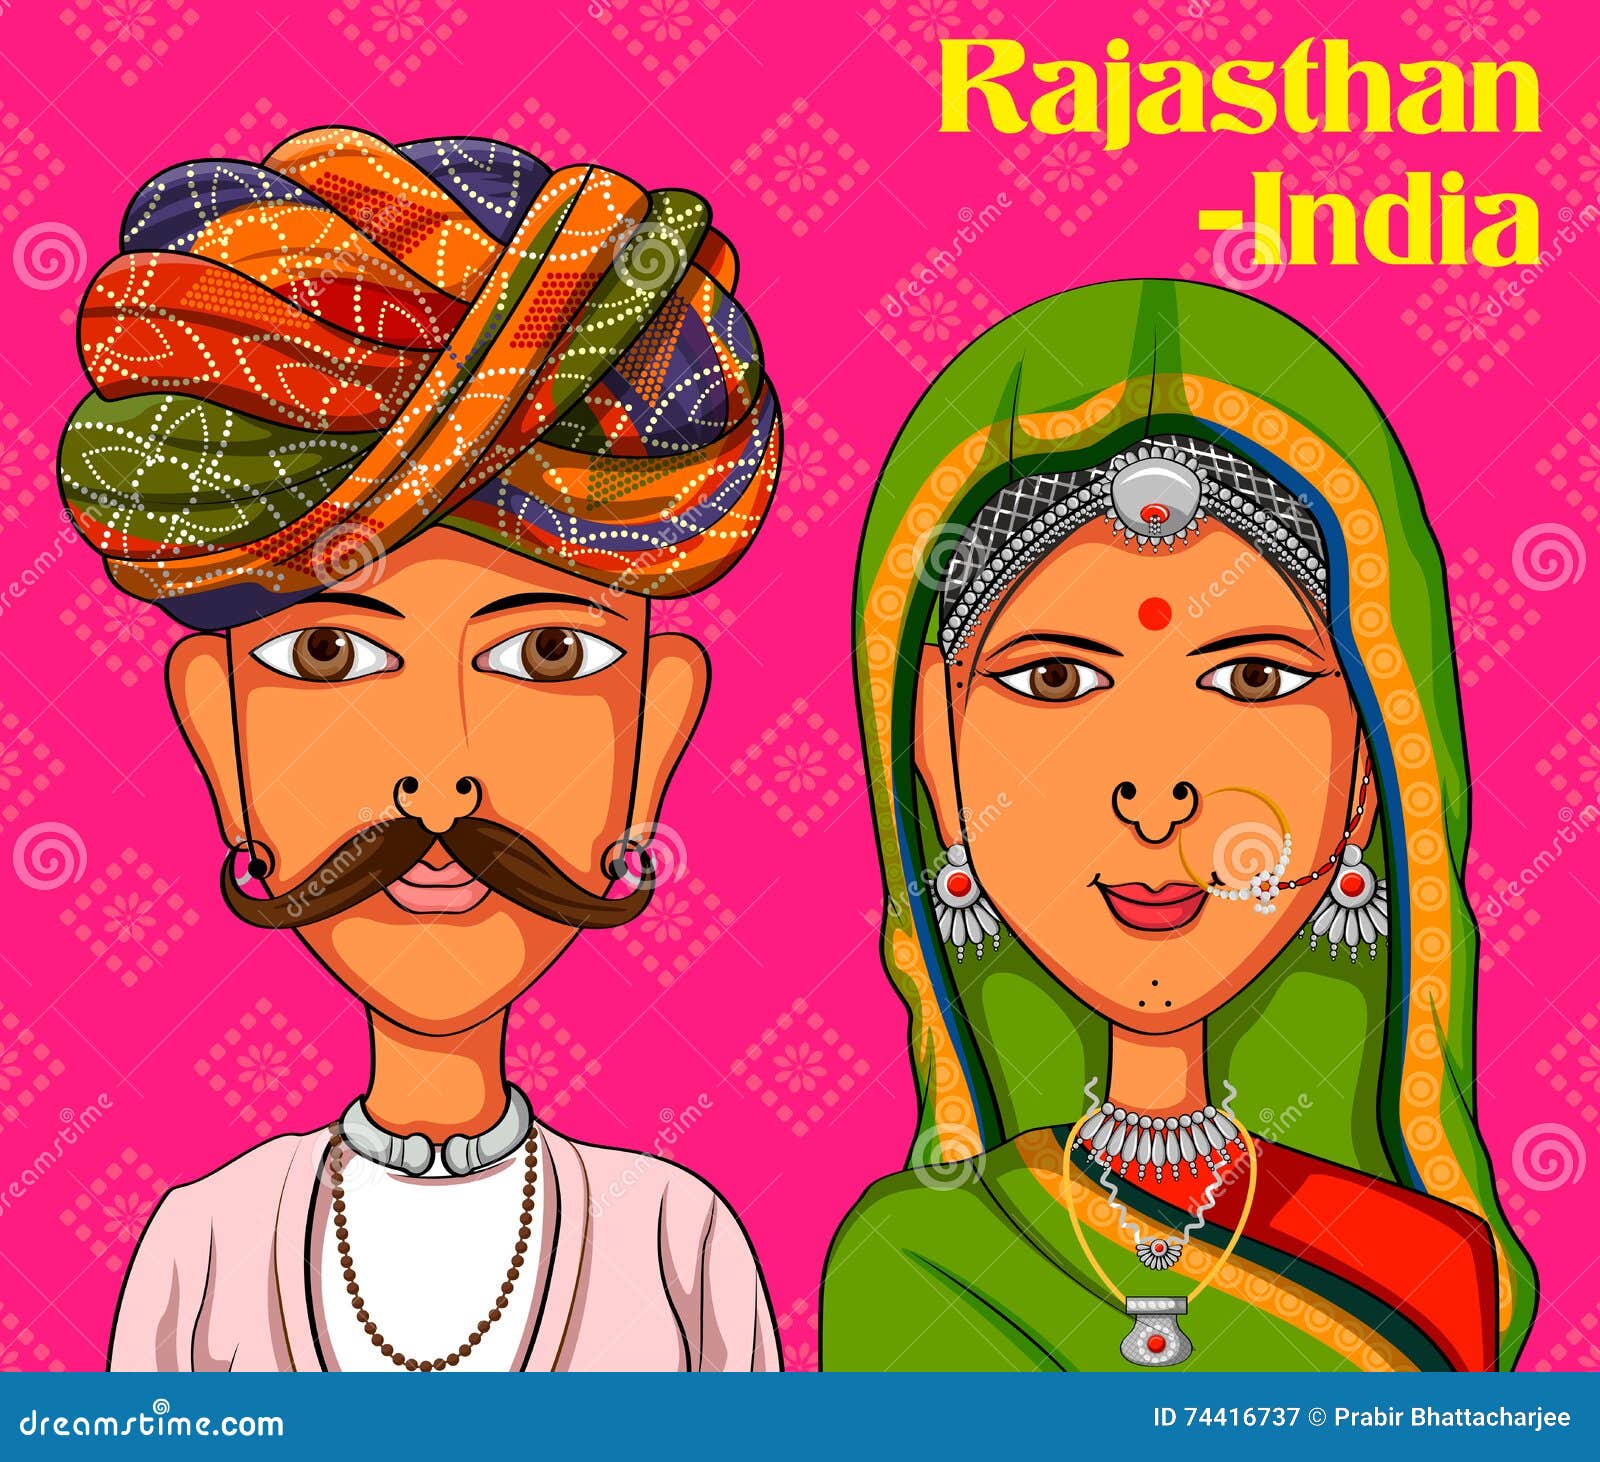 rajasthanii couple in traditional costume of rajasthan, india